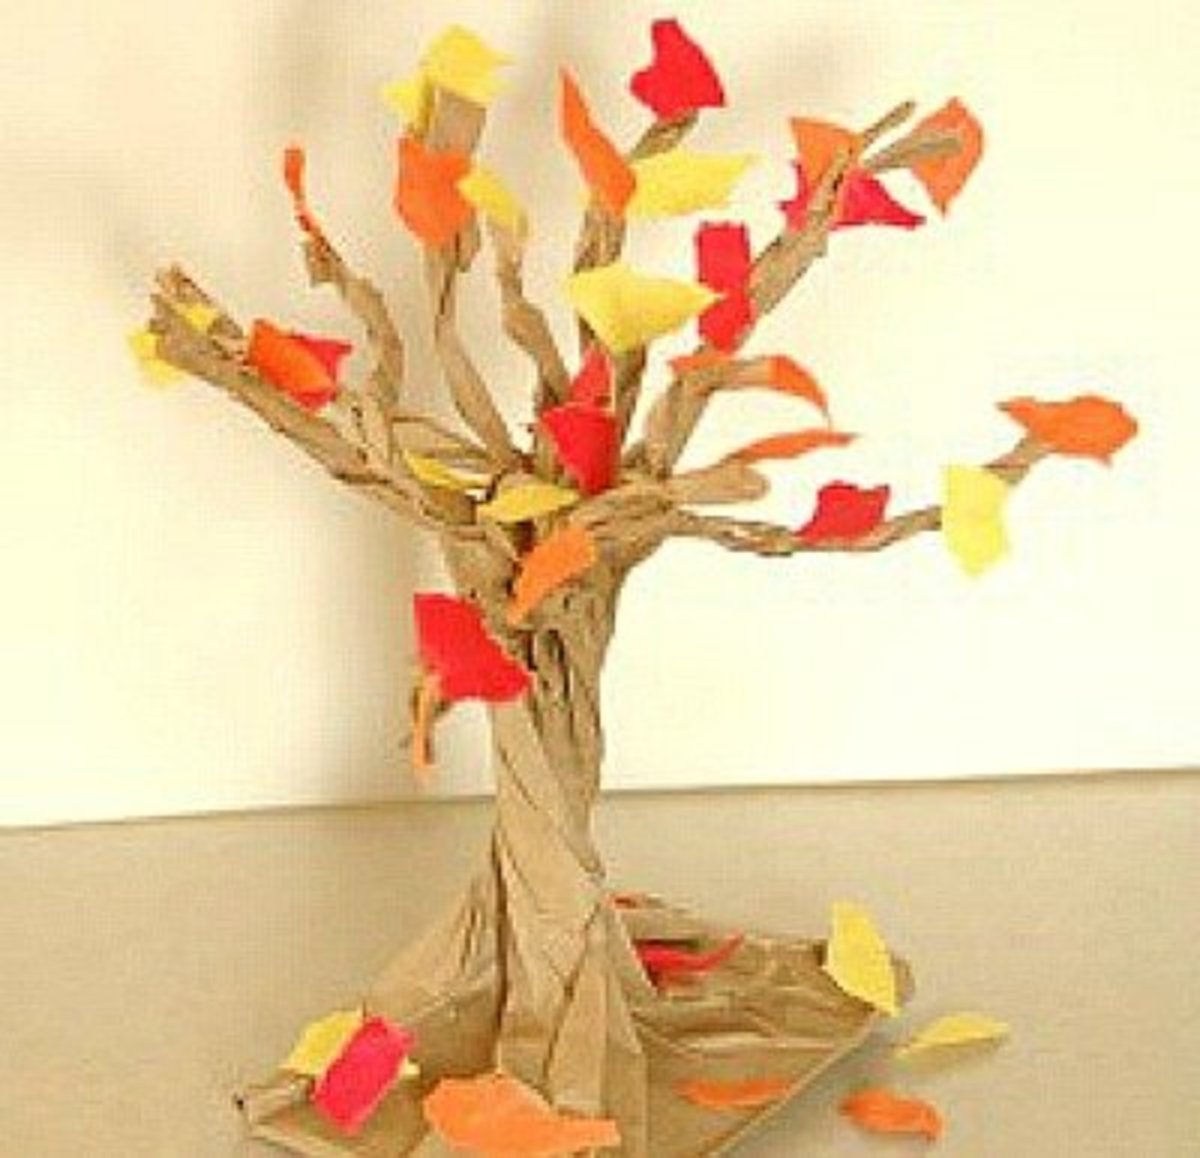 50 Creative Paper Bag Craft Ideas | hubpages